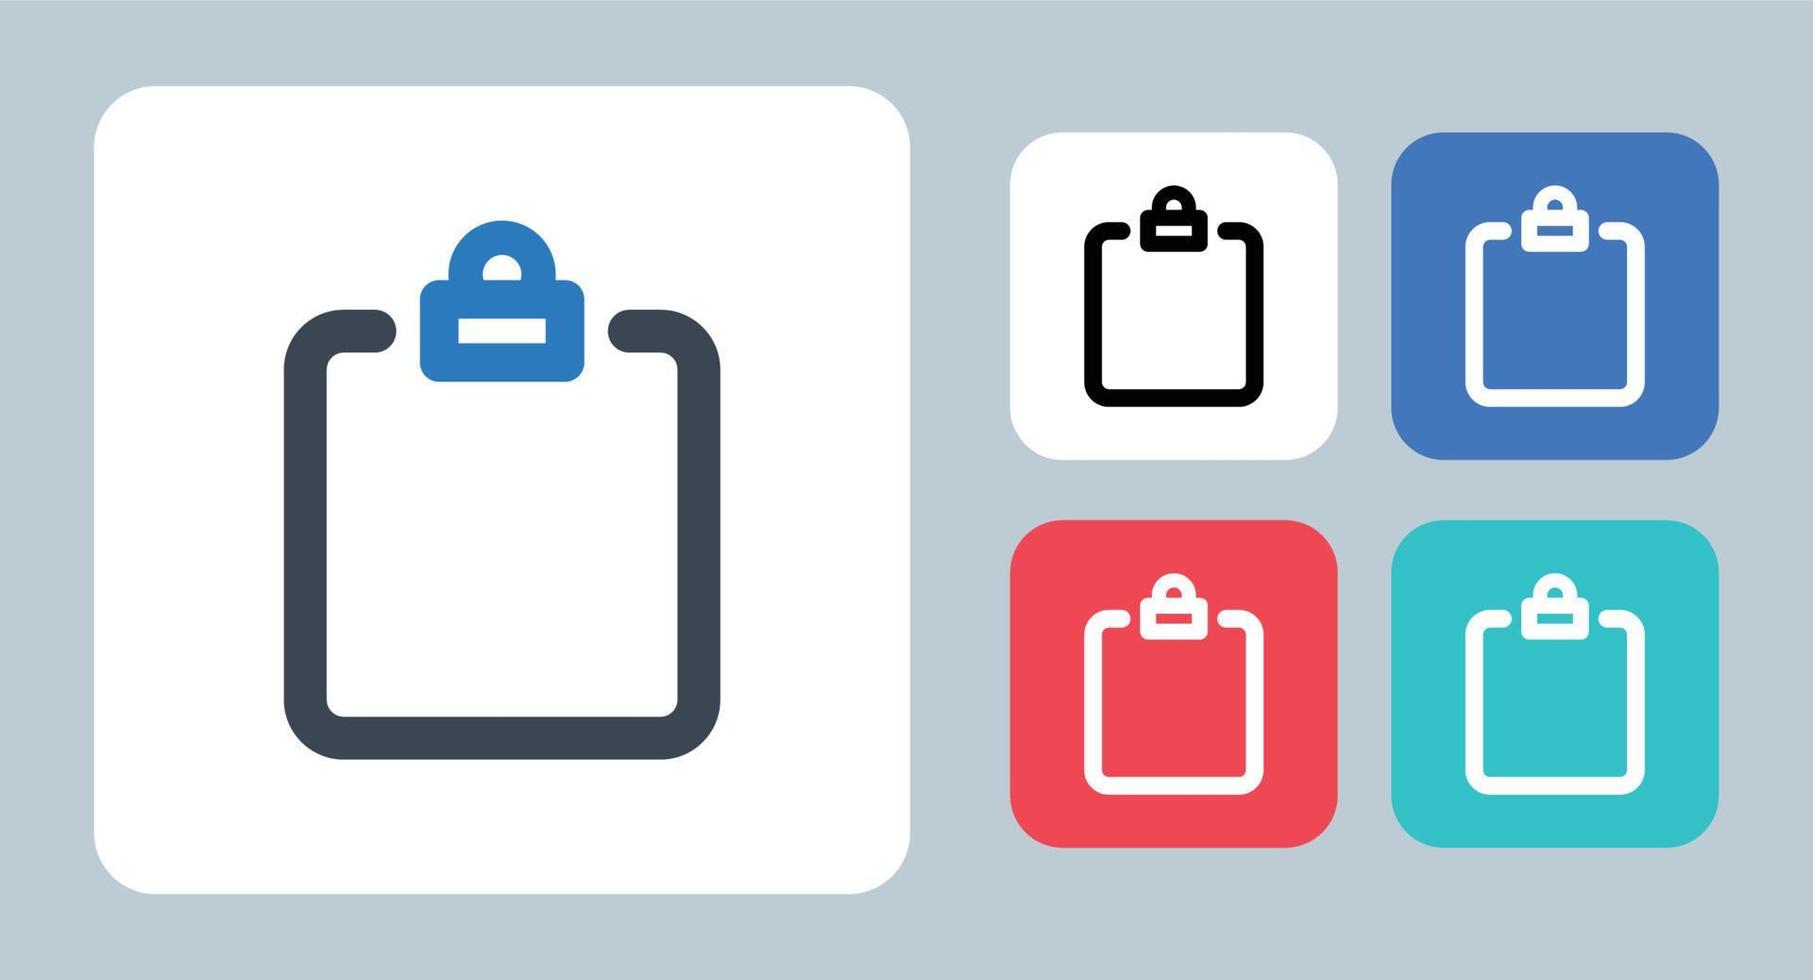 Clipboard icon - vector illustration . Clipboard, Document, Empty, Notepad, List, Report, Page, File, line, outline, flat, icons .